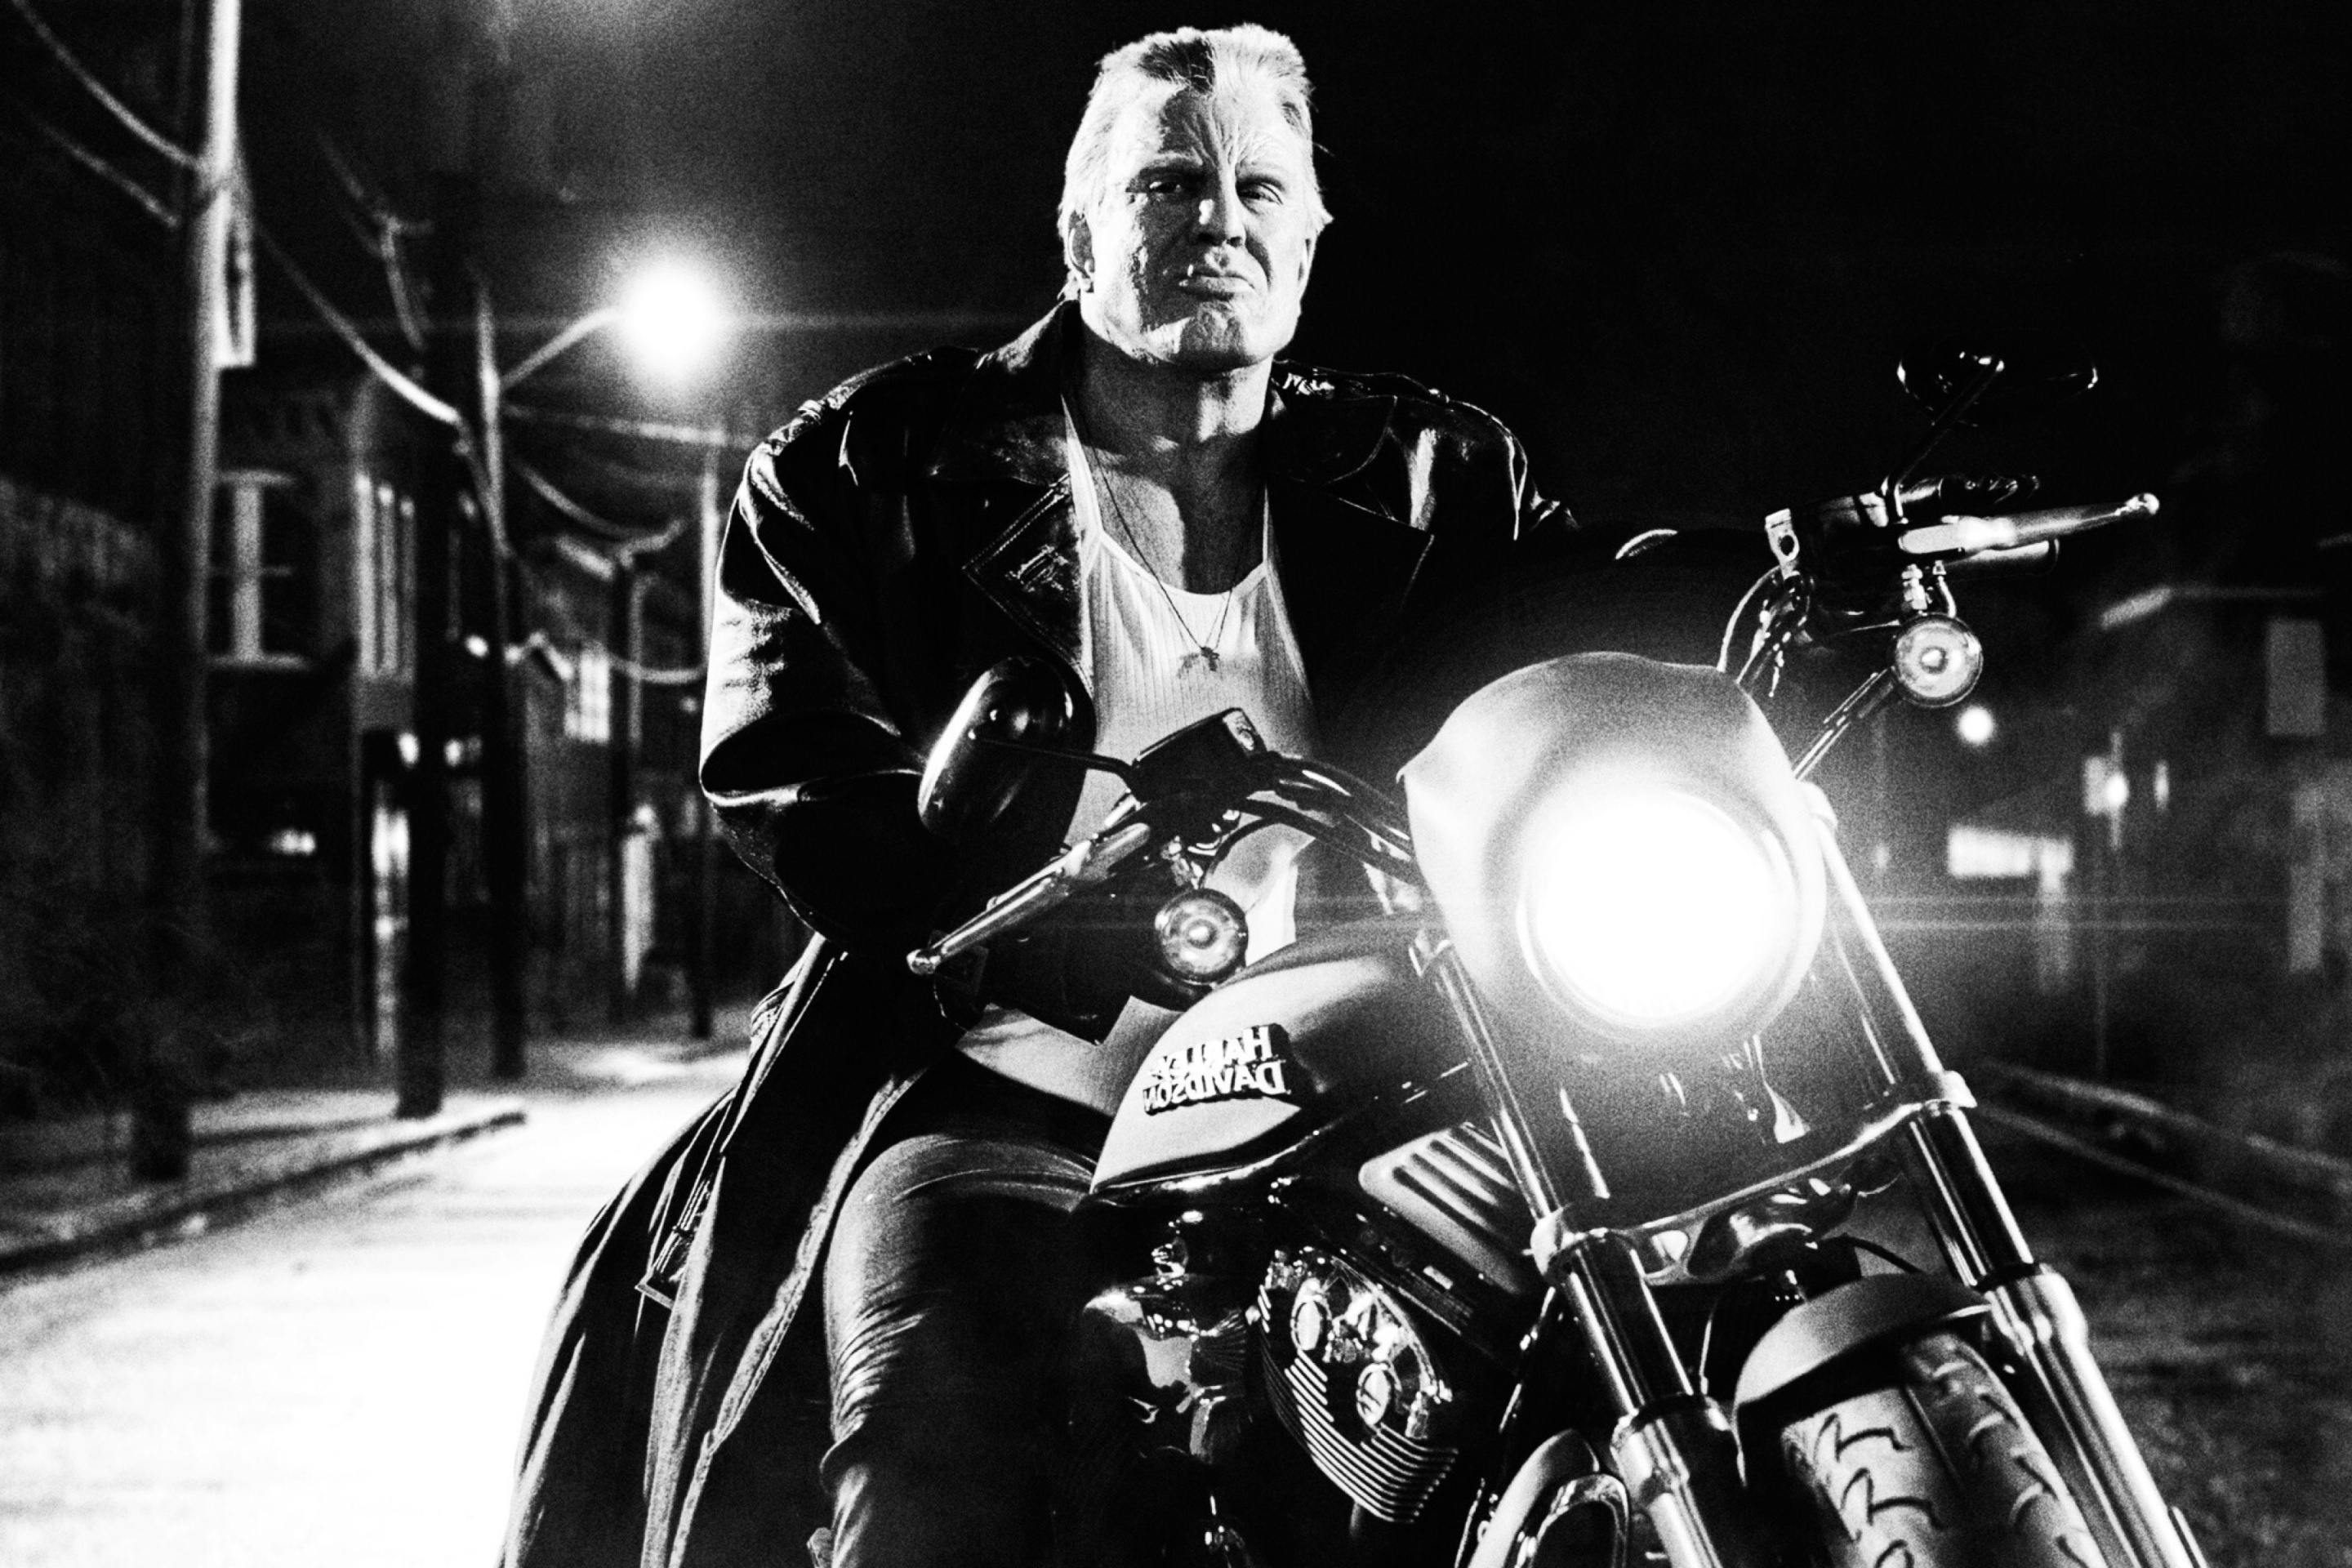 Marv as Mickey Rourke, Sin City wallpaper, Xperia tablet Z, Dark and mysterious, 2880x1920 HD Desktop